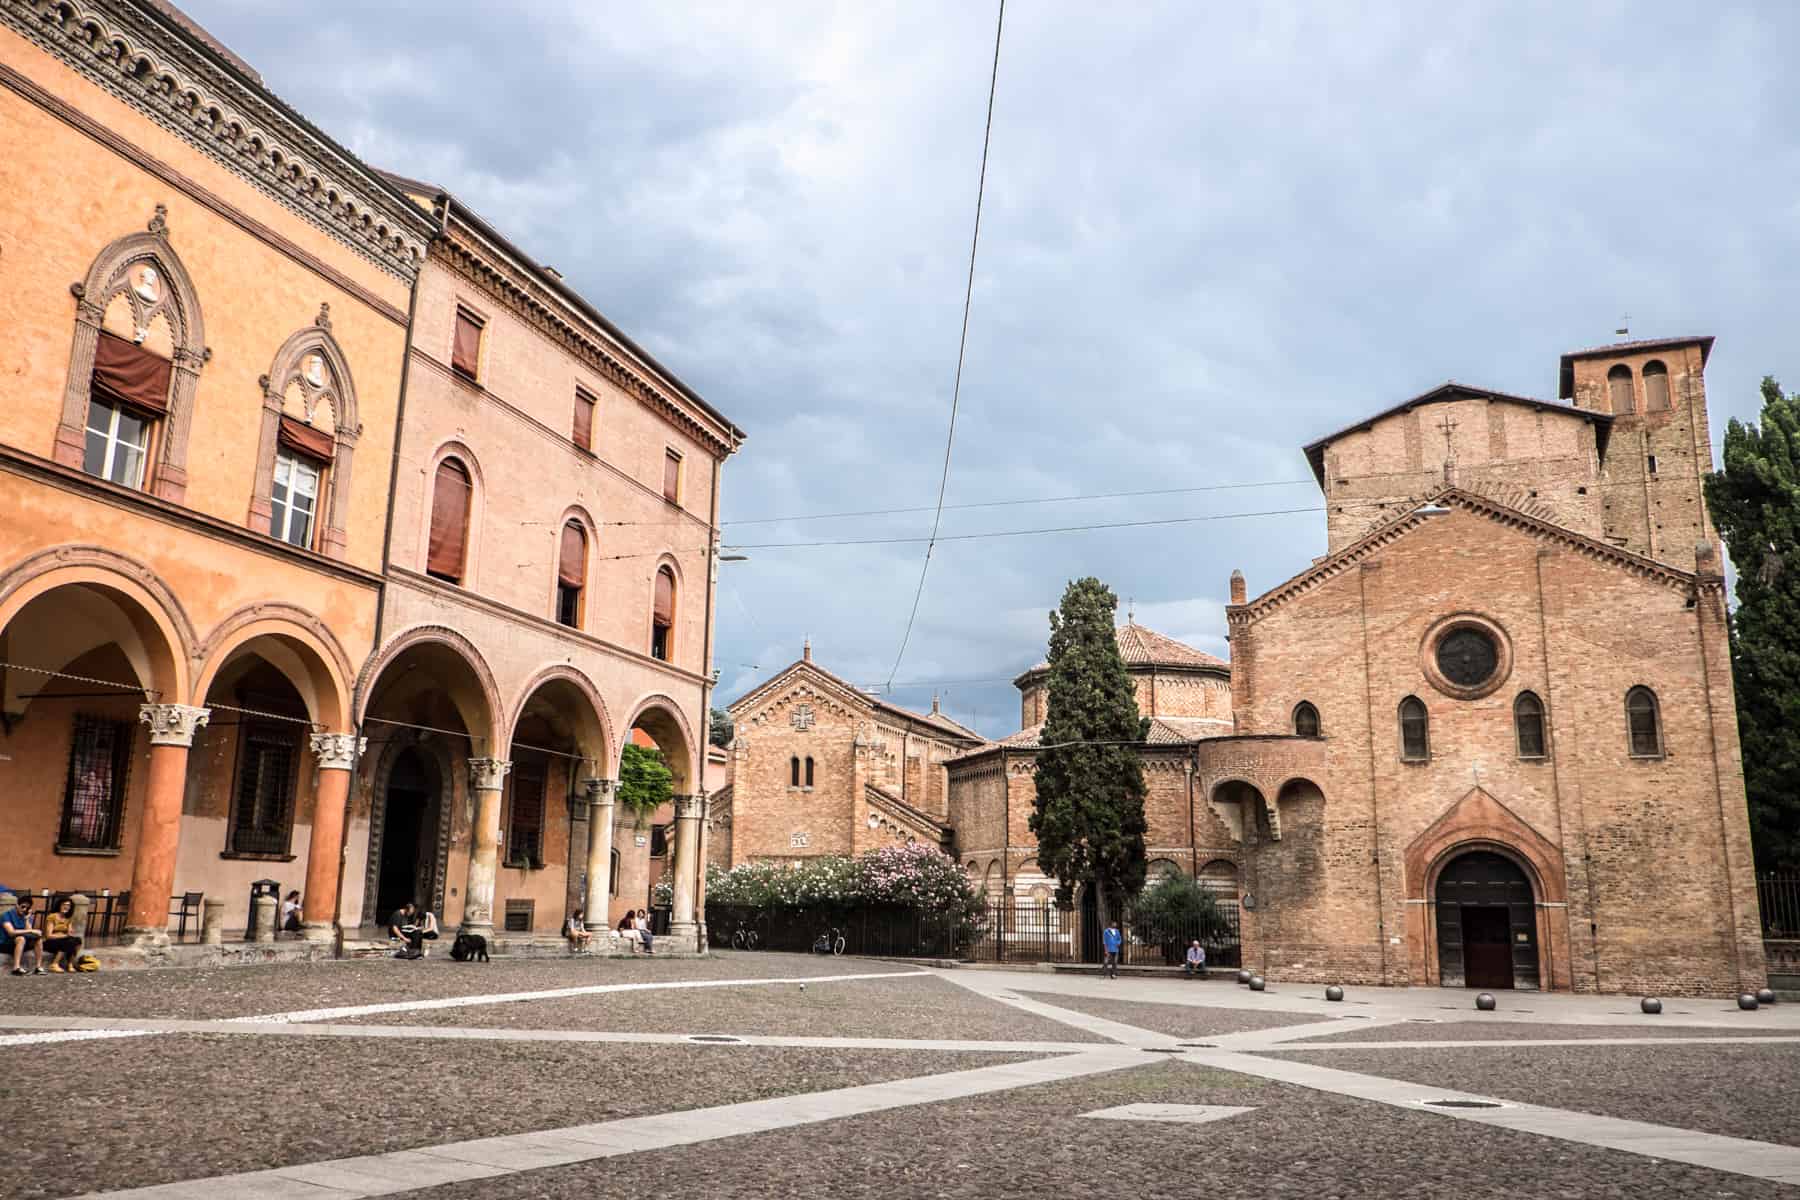 Orange and pink Palazzos to the left and the brown Basilica of Santo Stefano to the right, in Bologna's Piazza Santo Stefano.